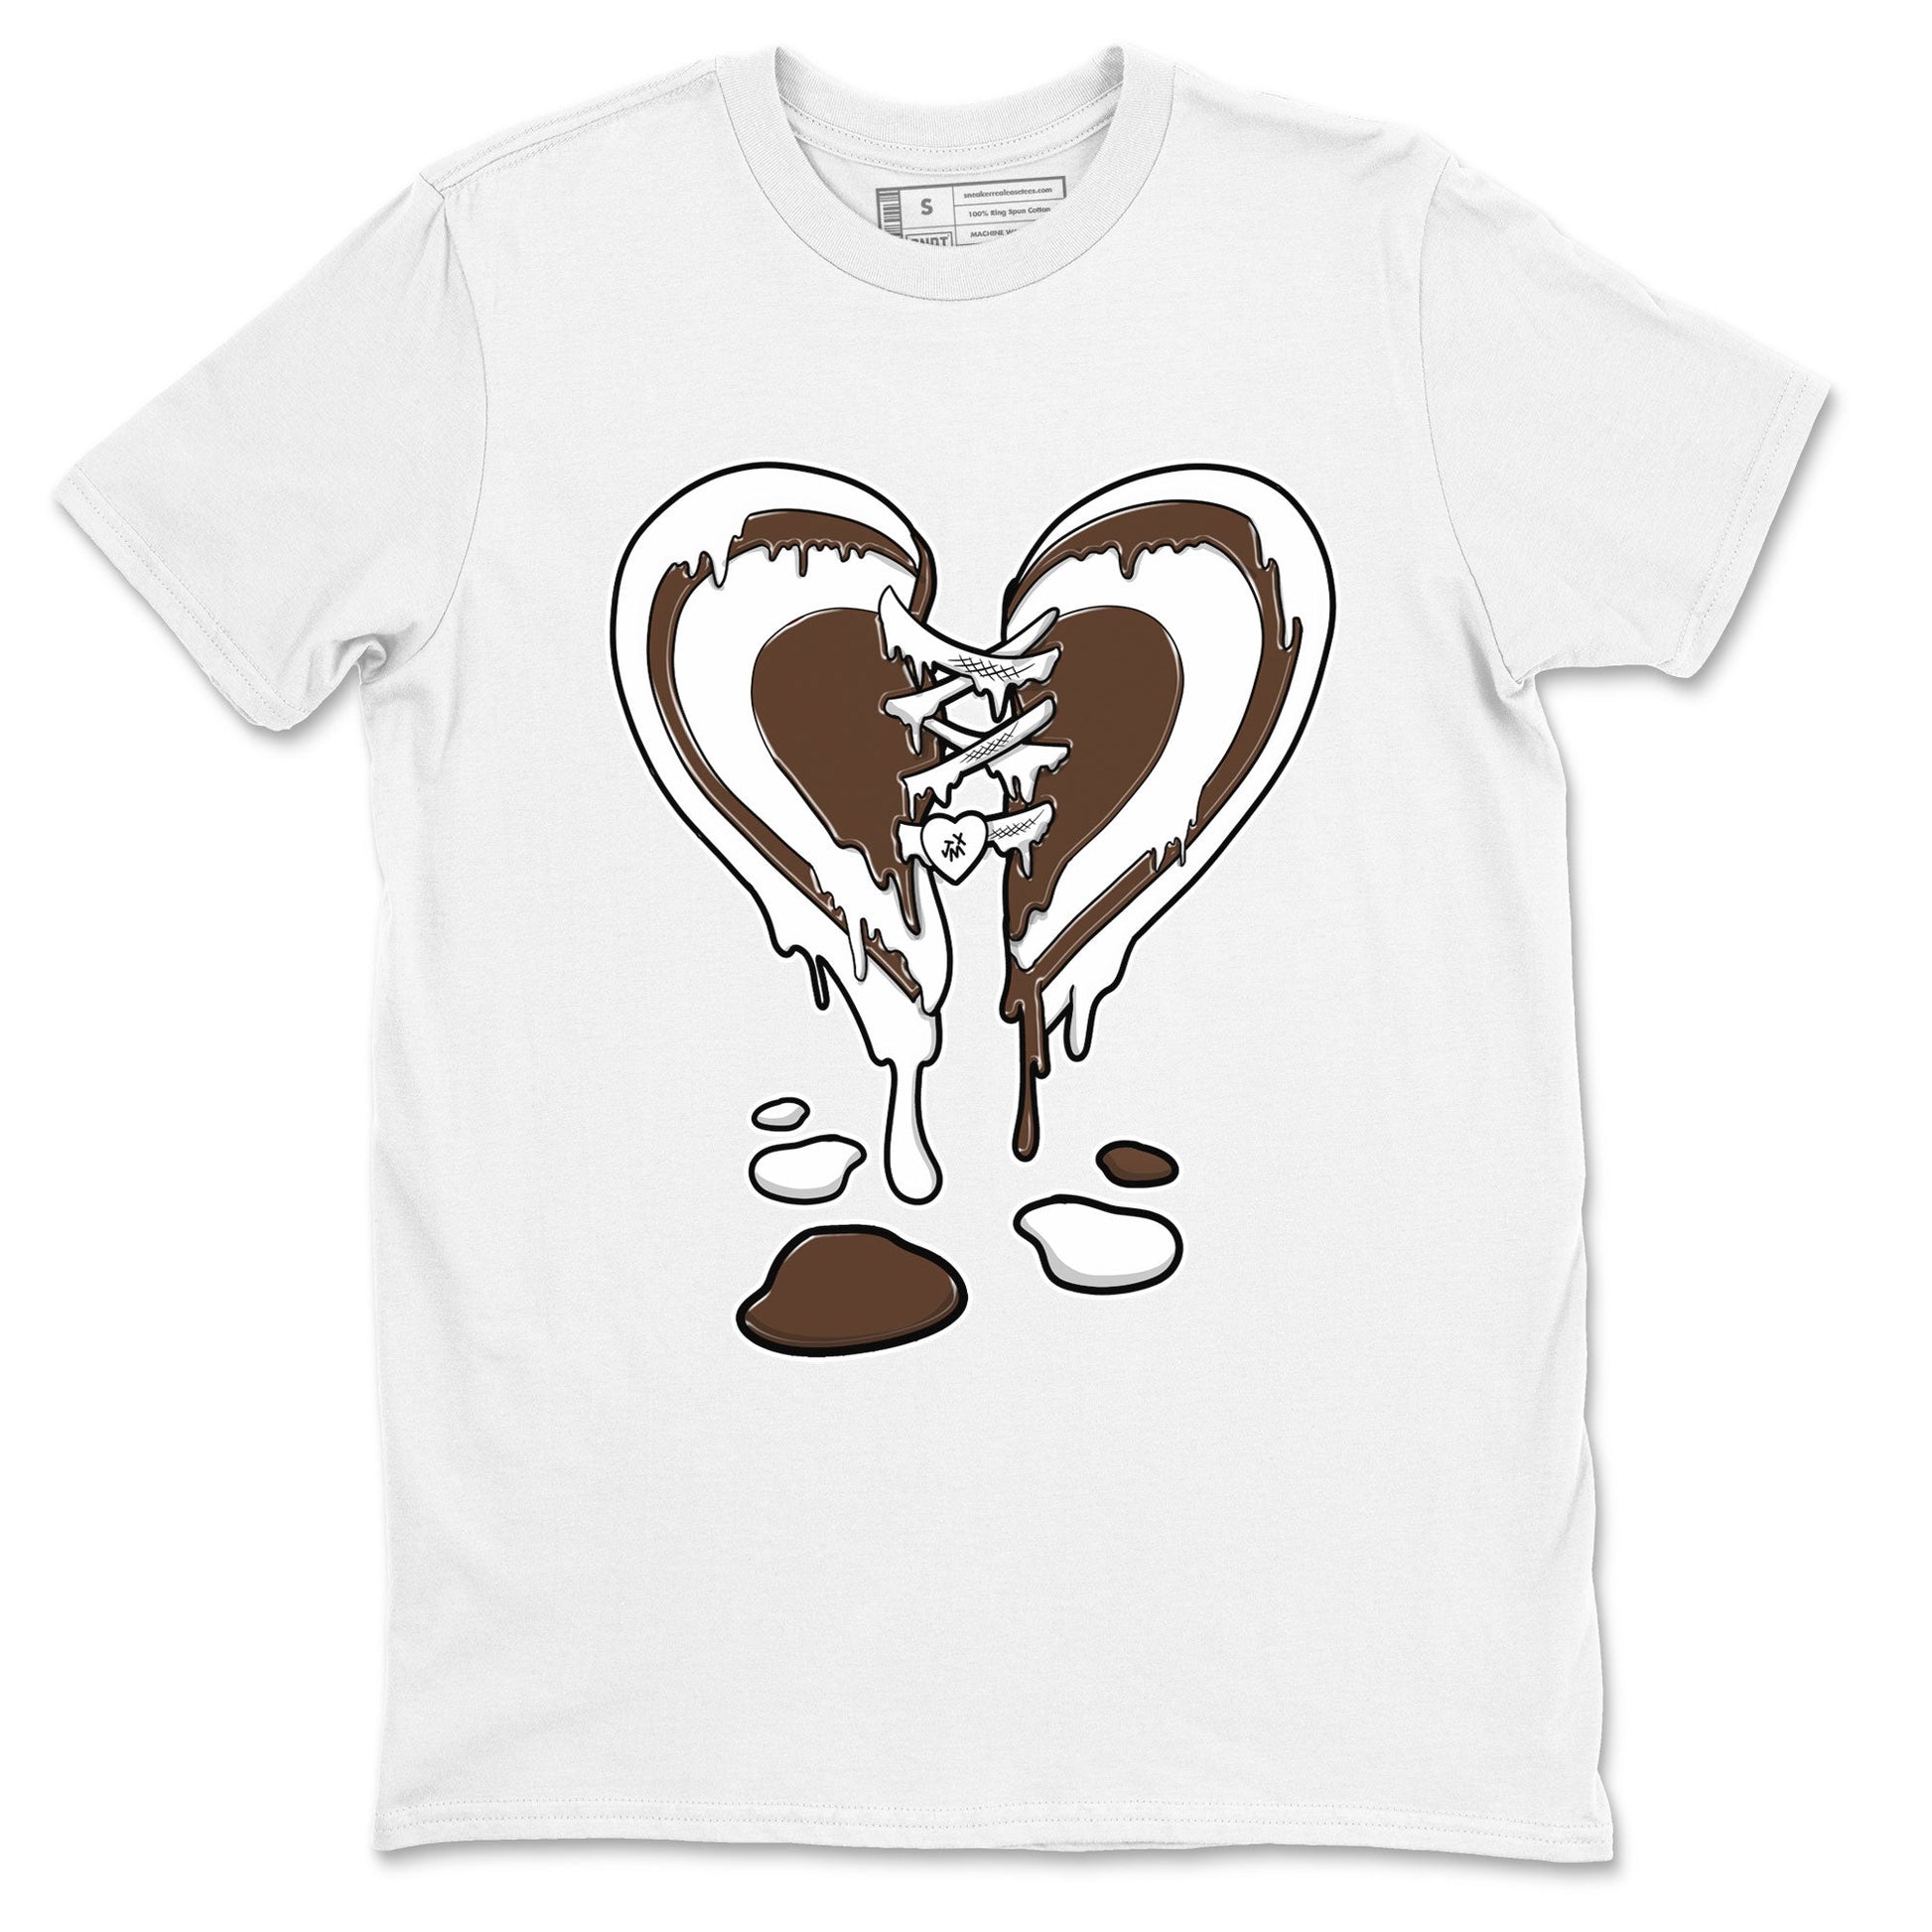 AF1 Chocolate shirt to match jordans Melting Heart sneaker tees Air Force 1 Chocolate SNRT Sneaker Release Tees Cotton Sneaker Tee White 2 T-Shirt